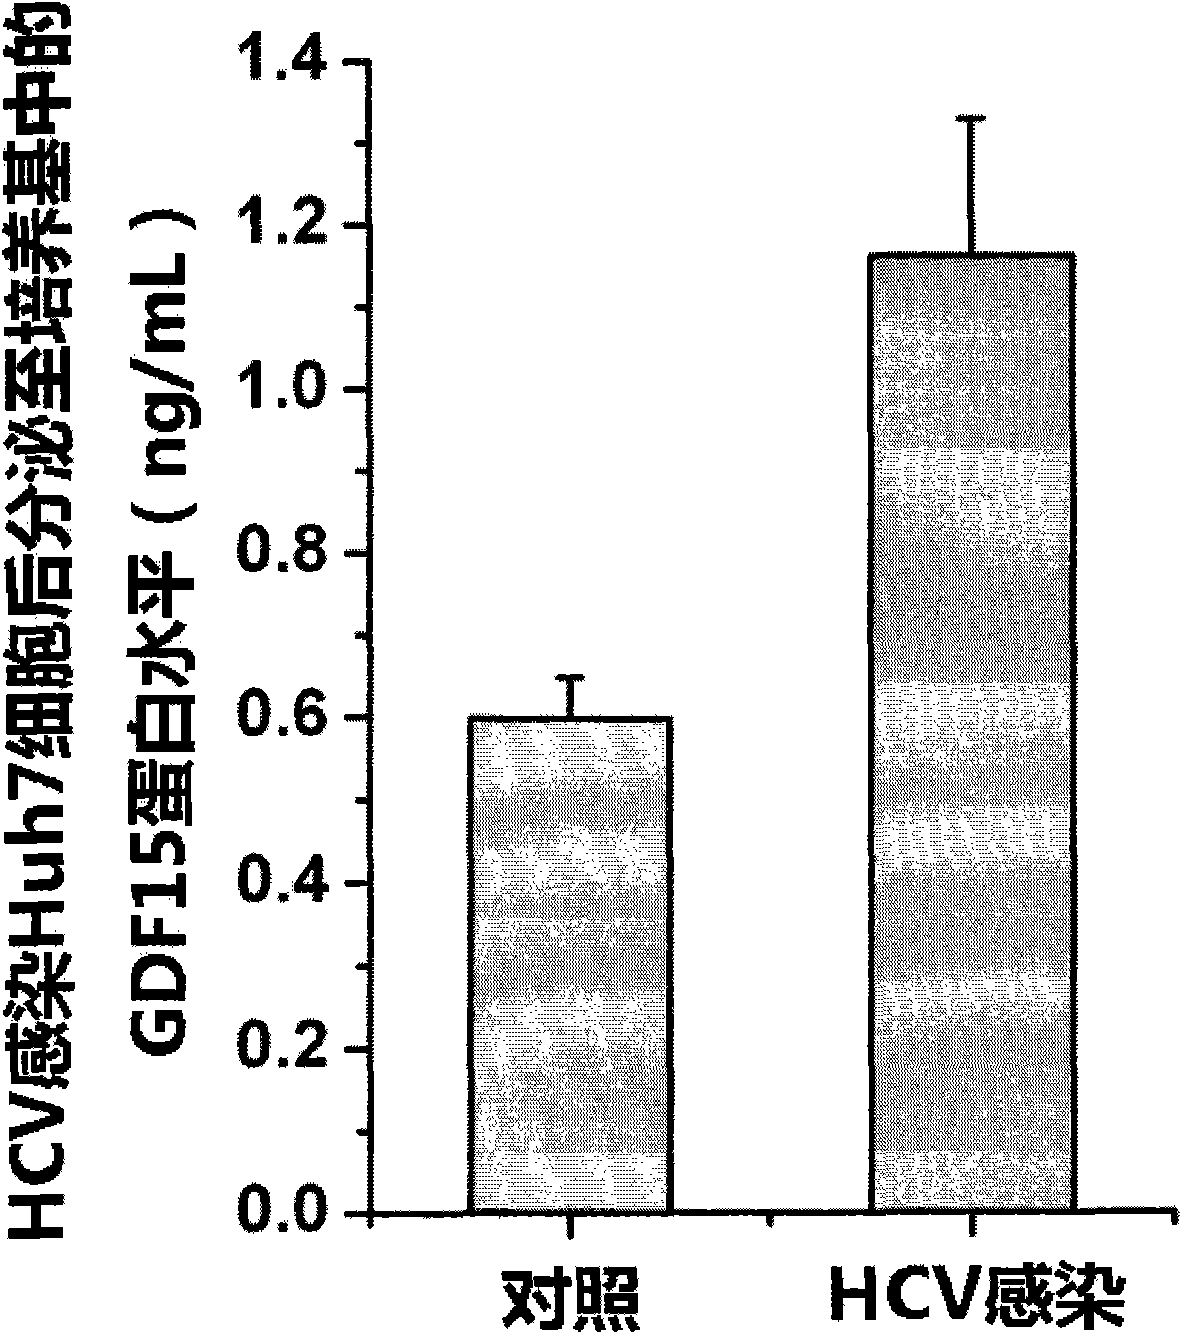 New applications of antibody of GDF15 (Growth differentiation factor 15) protein